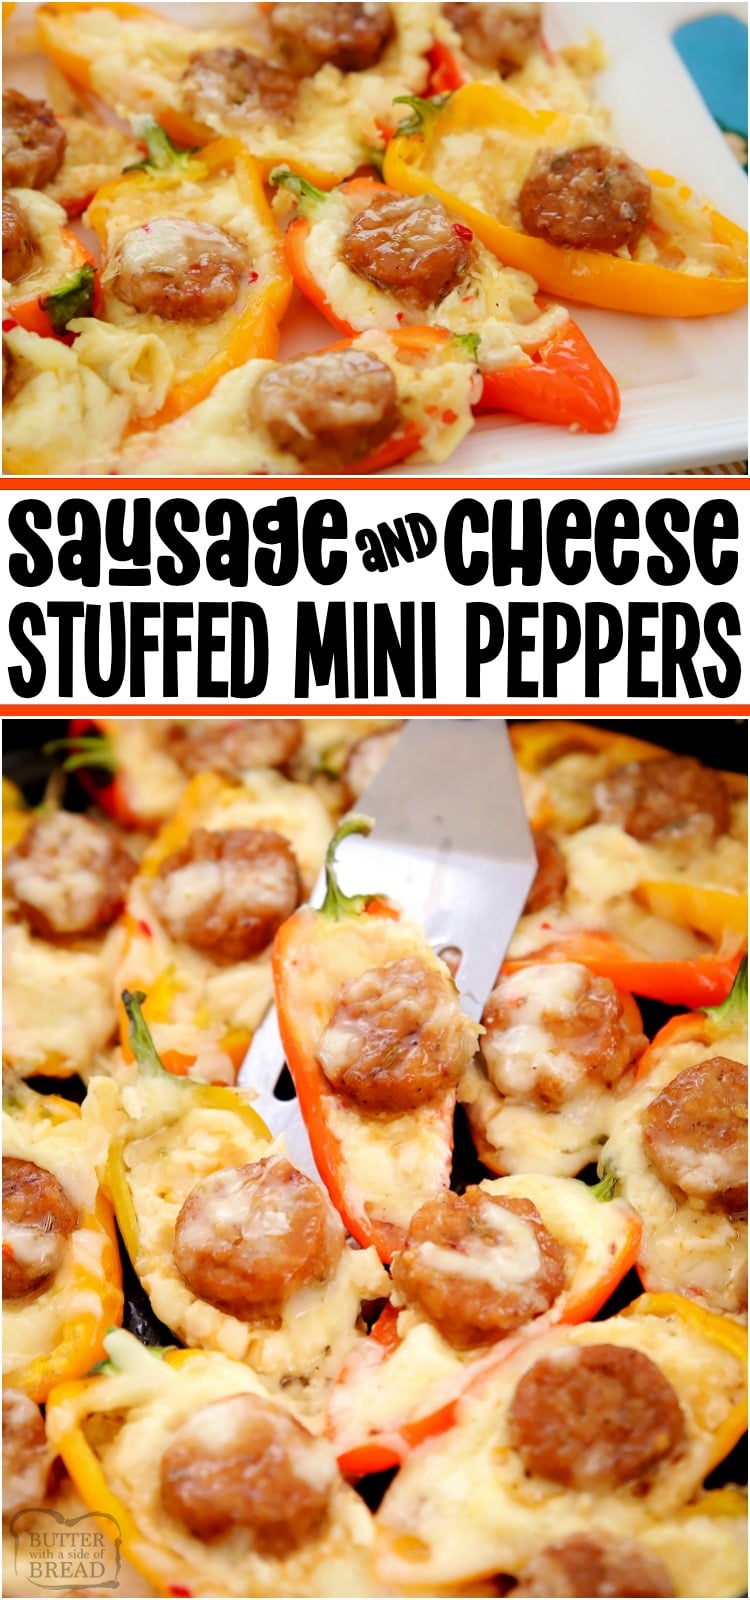 Stuffed Mini Peppers filled with Italian Sausage, cream cheese and Pepper Jack for a hearty, flavorful appetizer everyone loves!